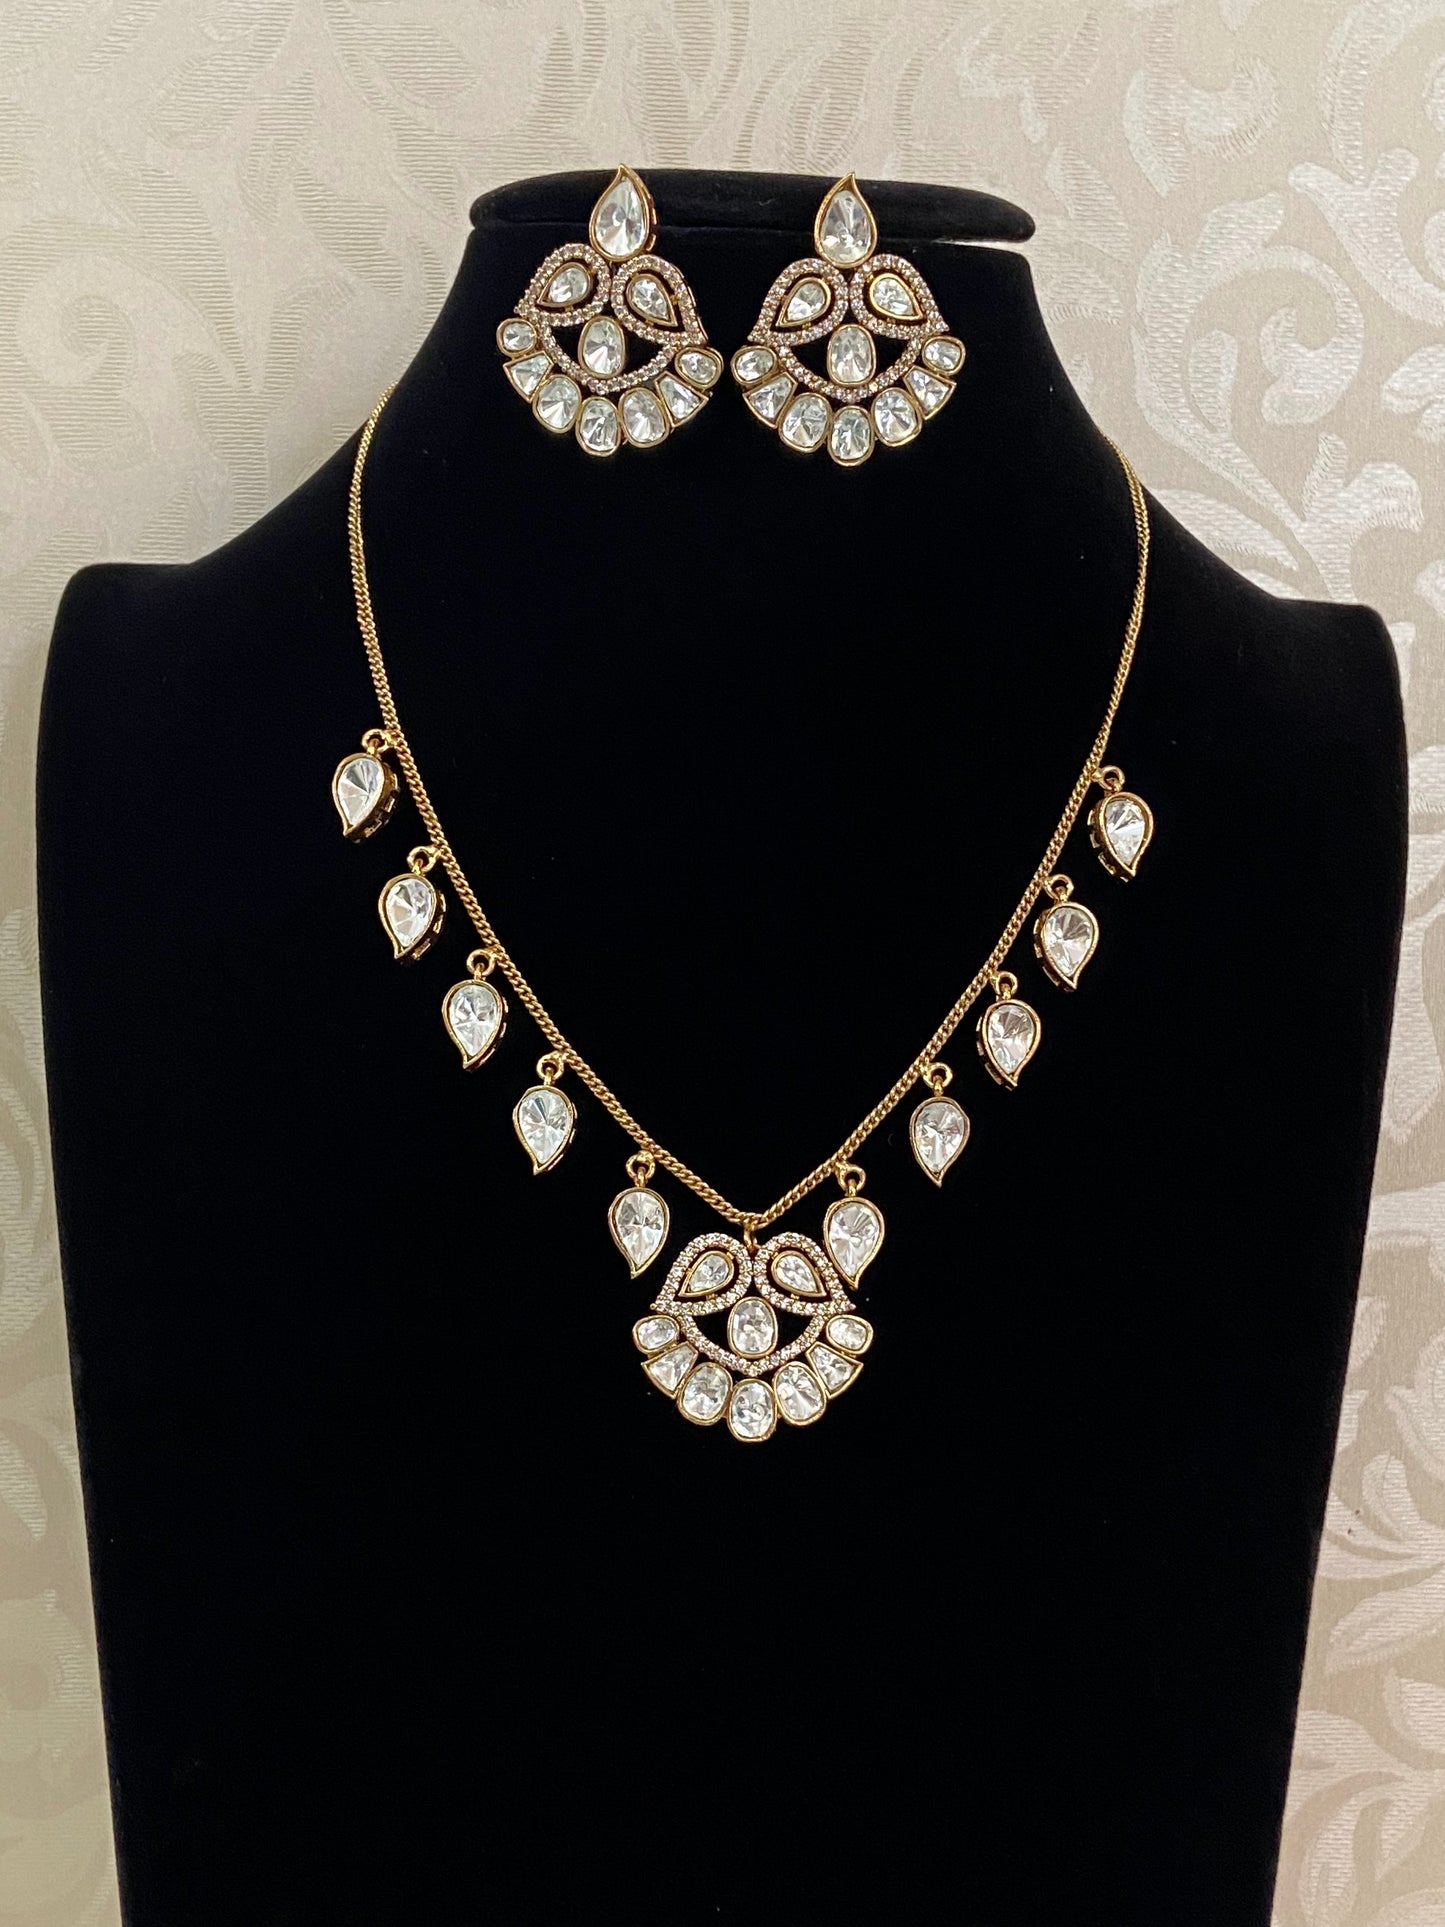 Kundan necklace set | Indian jewelry in USA